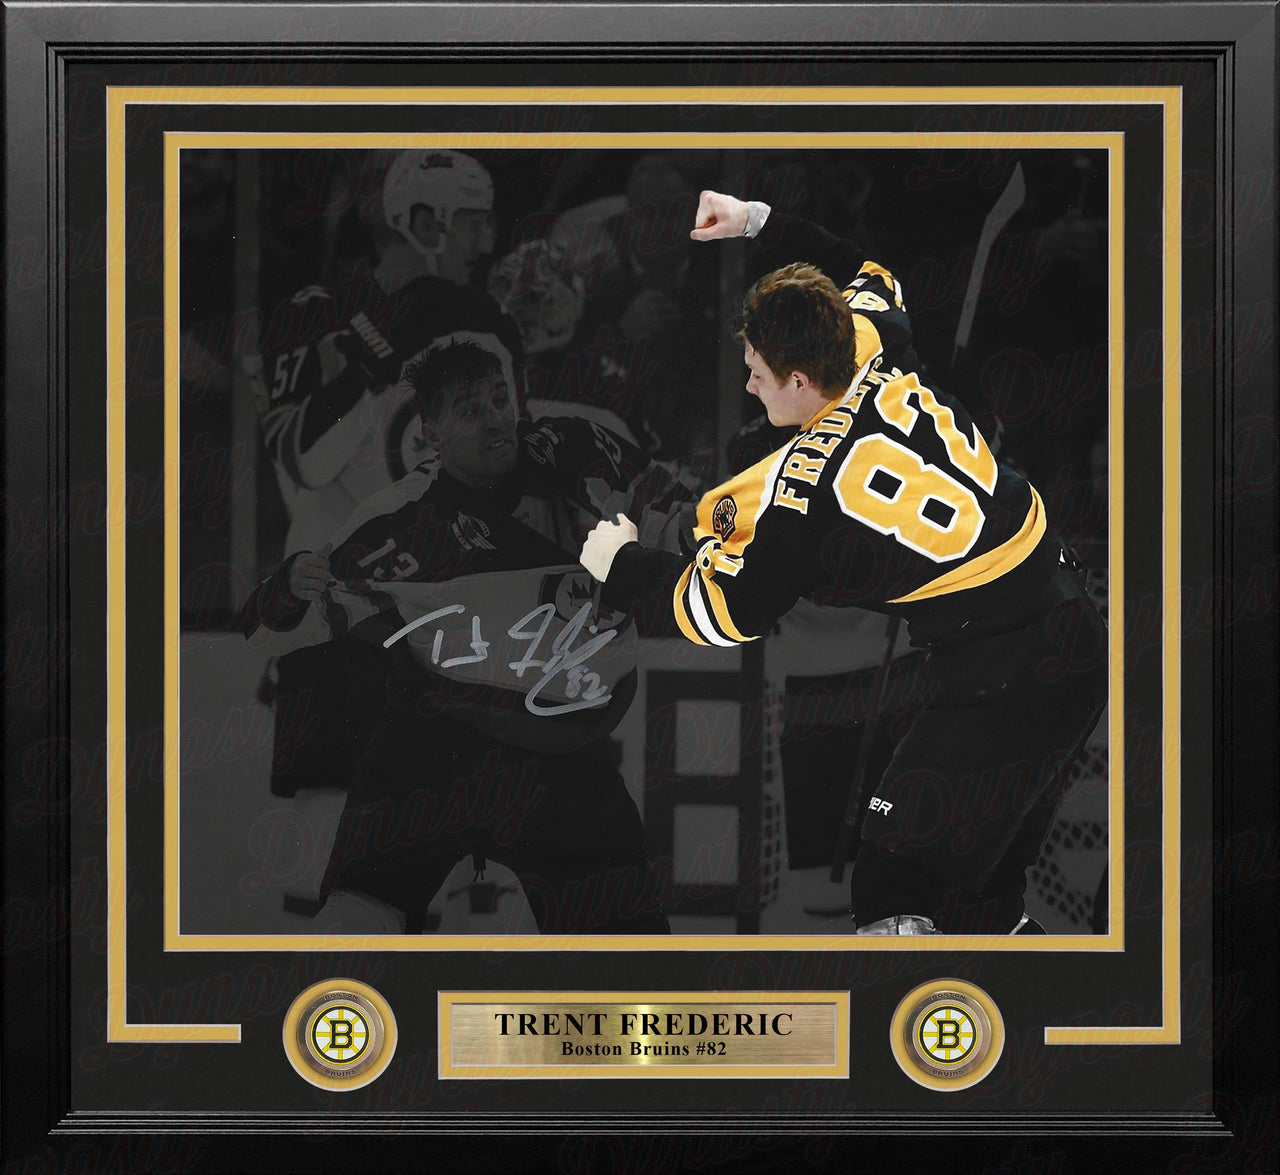 Trent Frederic Fight Boston Bruins Autographed 11" x 14" Framed Blackout Hockey Photo